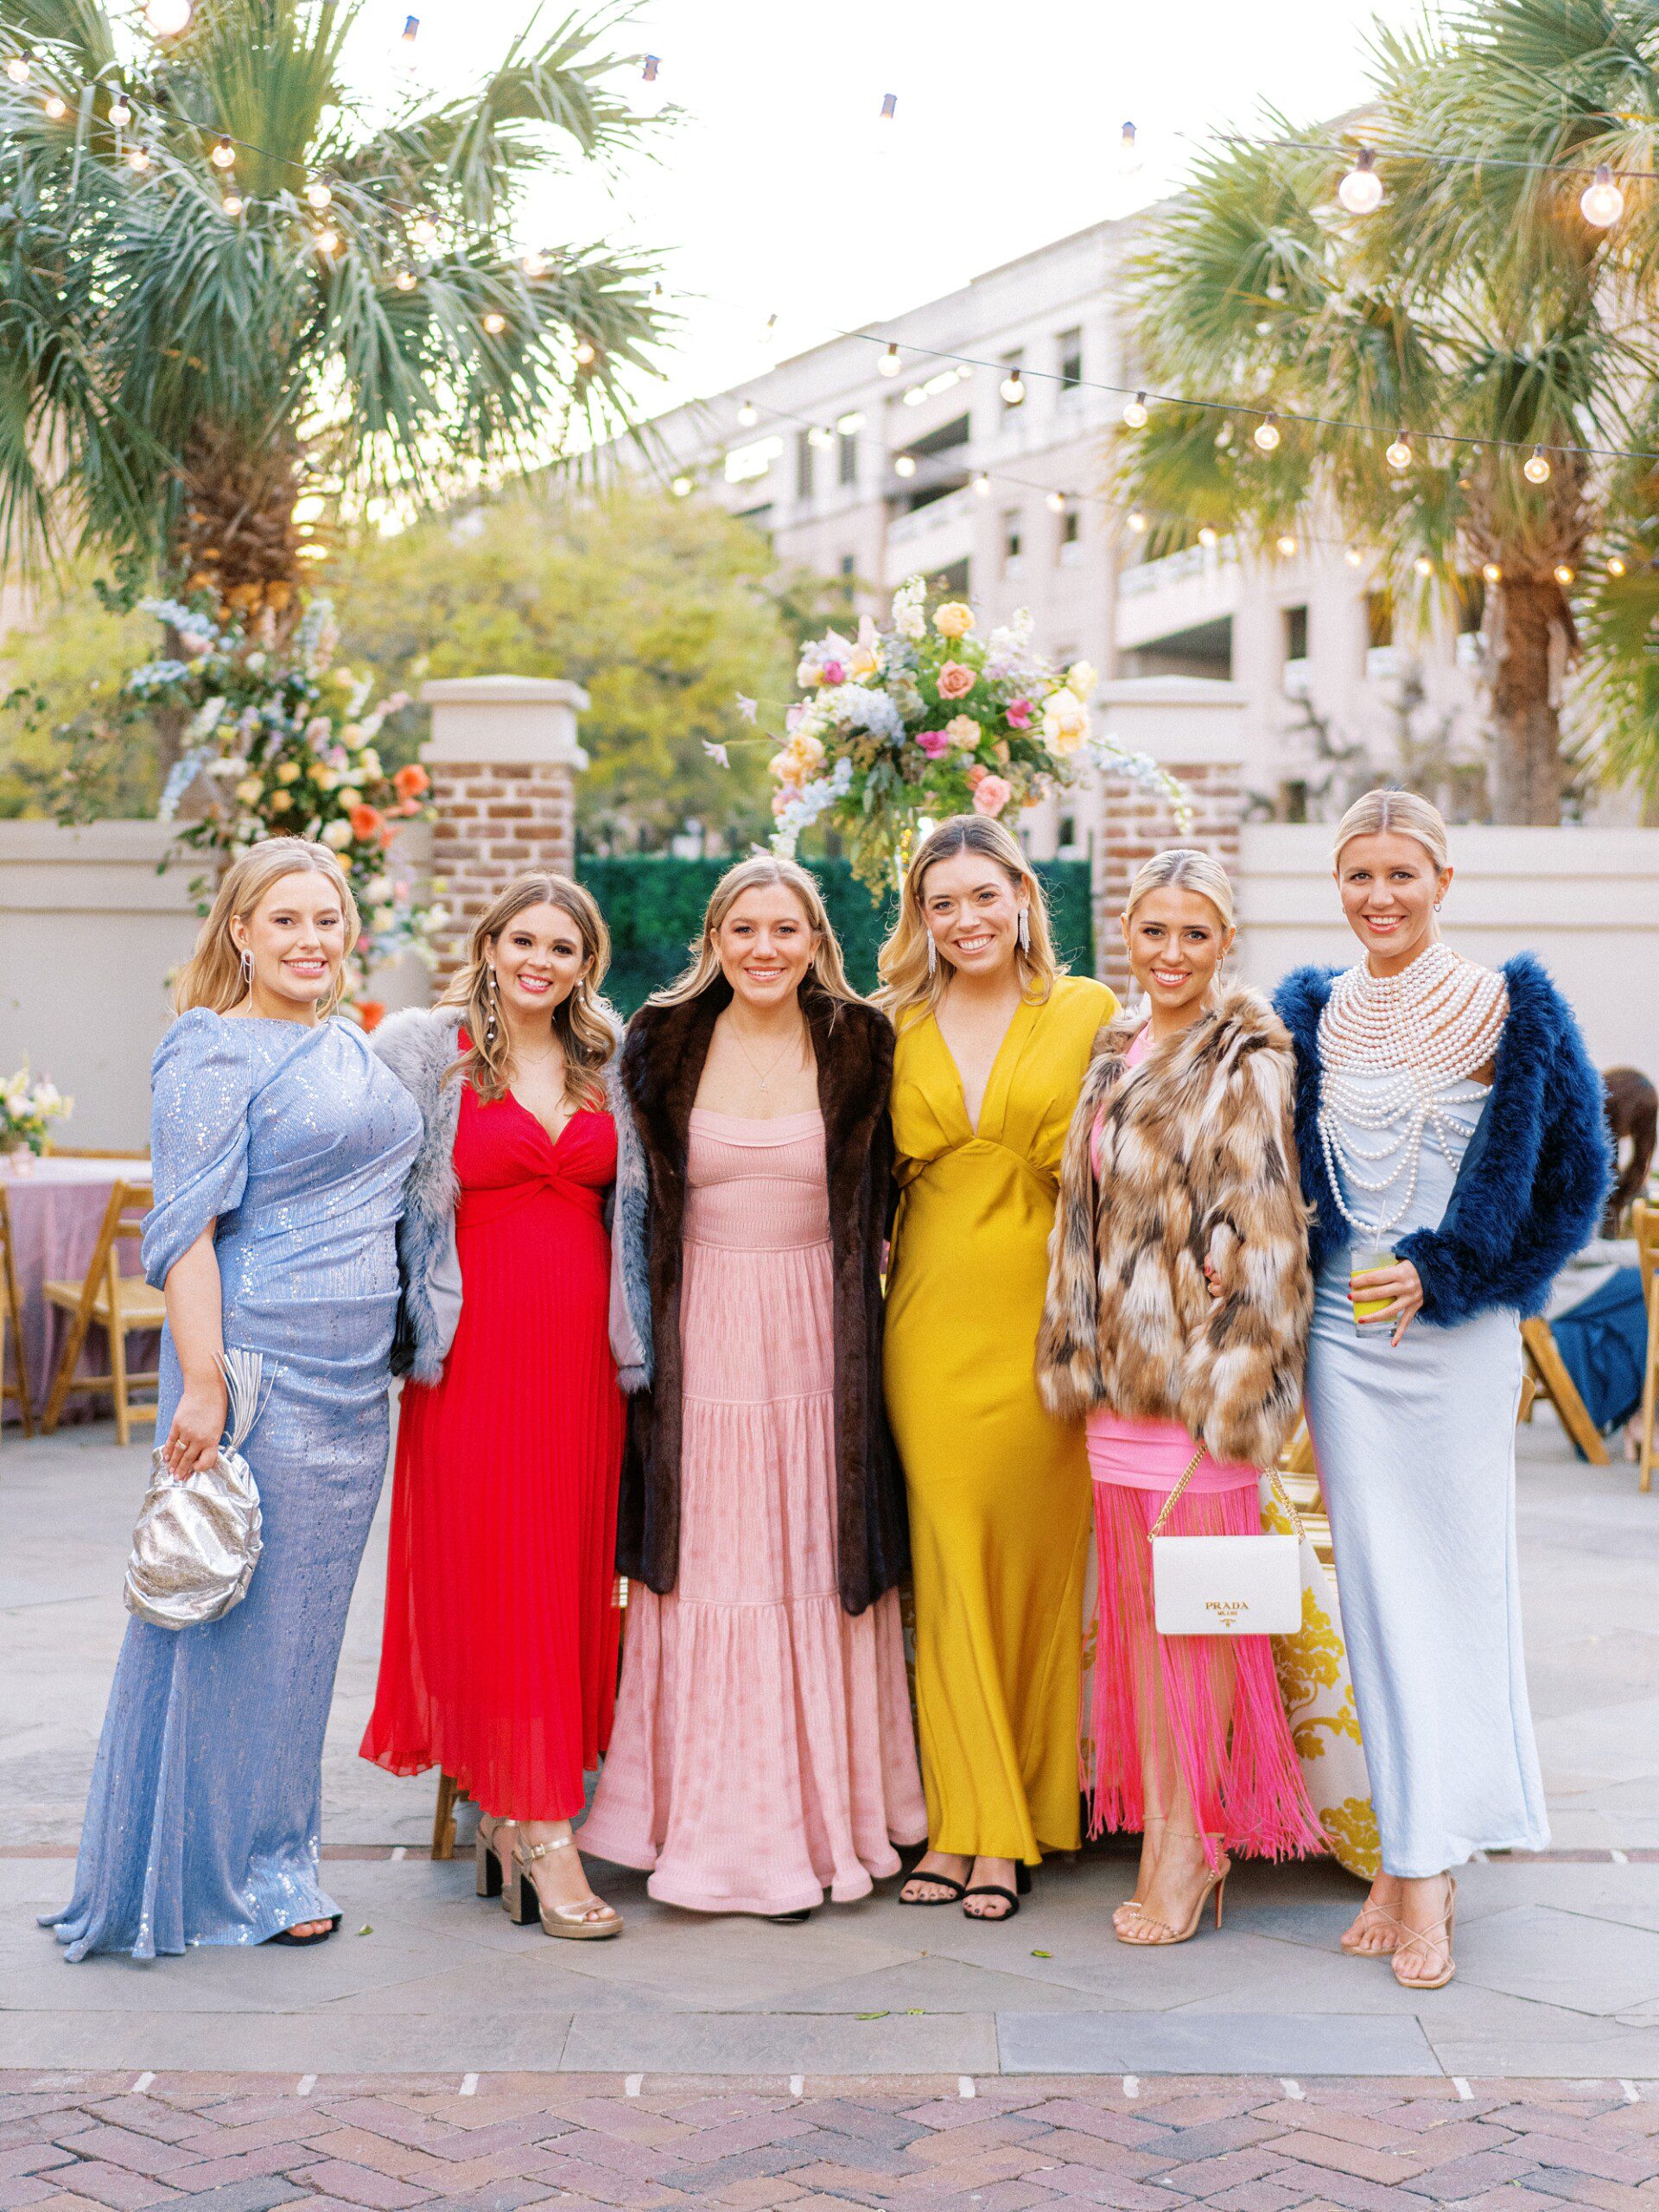 Fashionable wedding guests at cocktail hour at the Gadsden House wearing pink and yellow dresses and a Prada bag